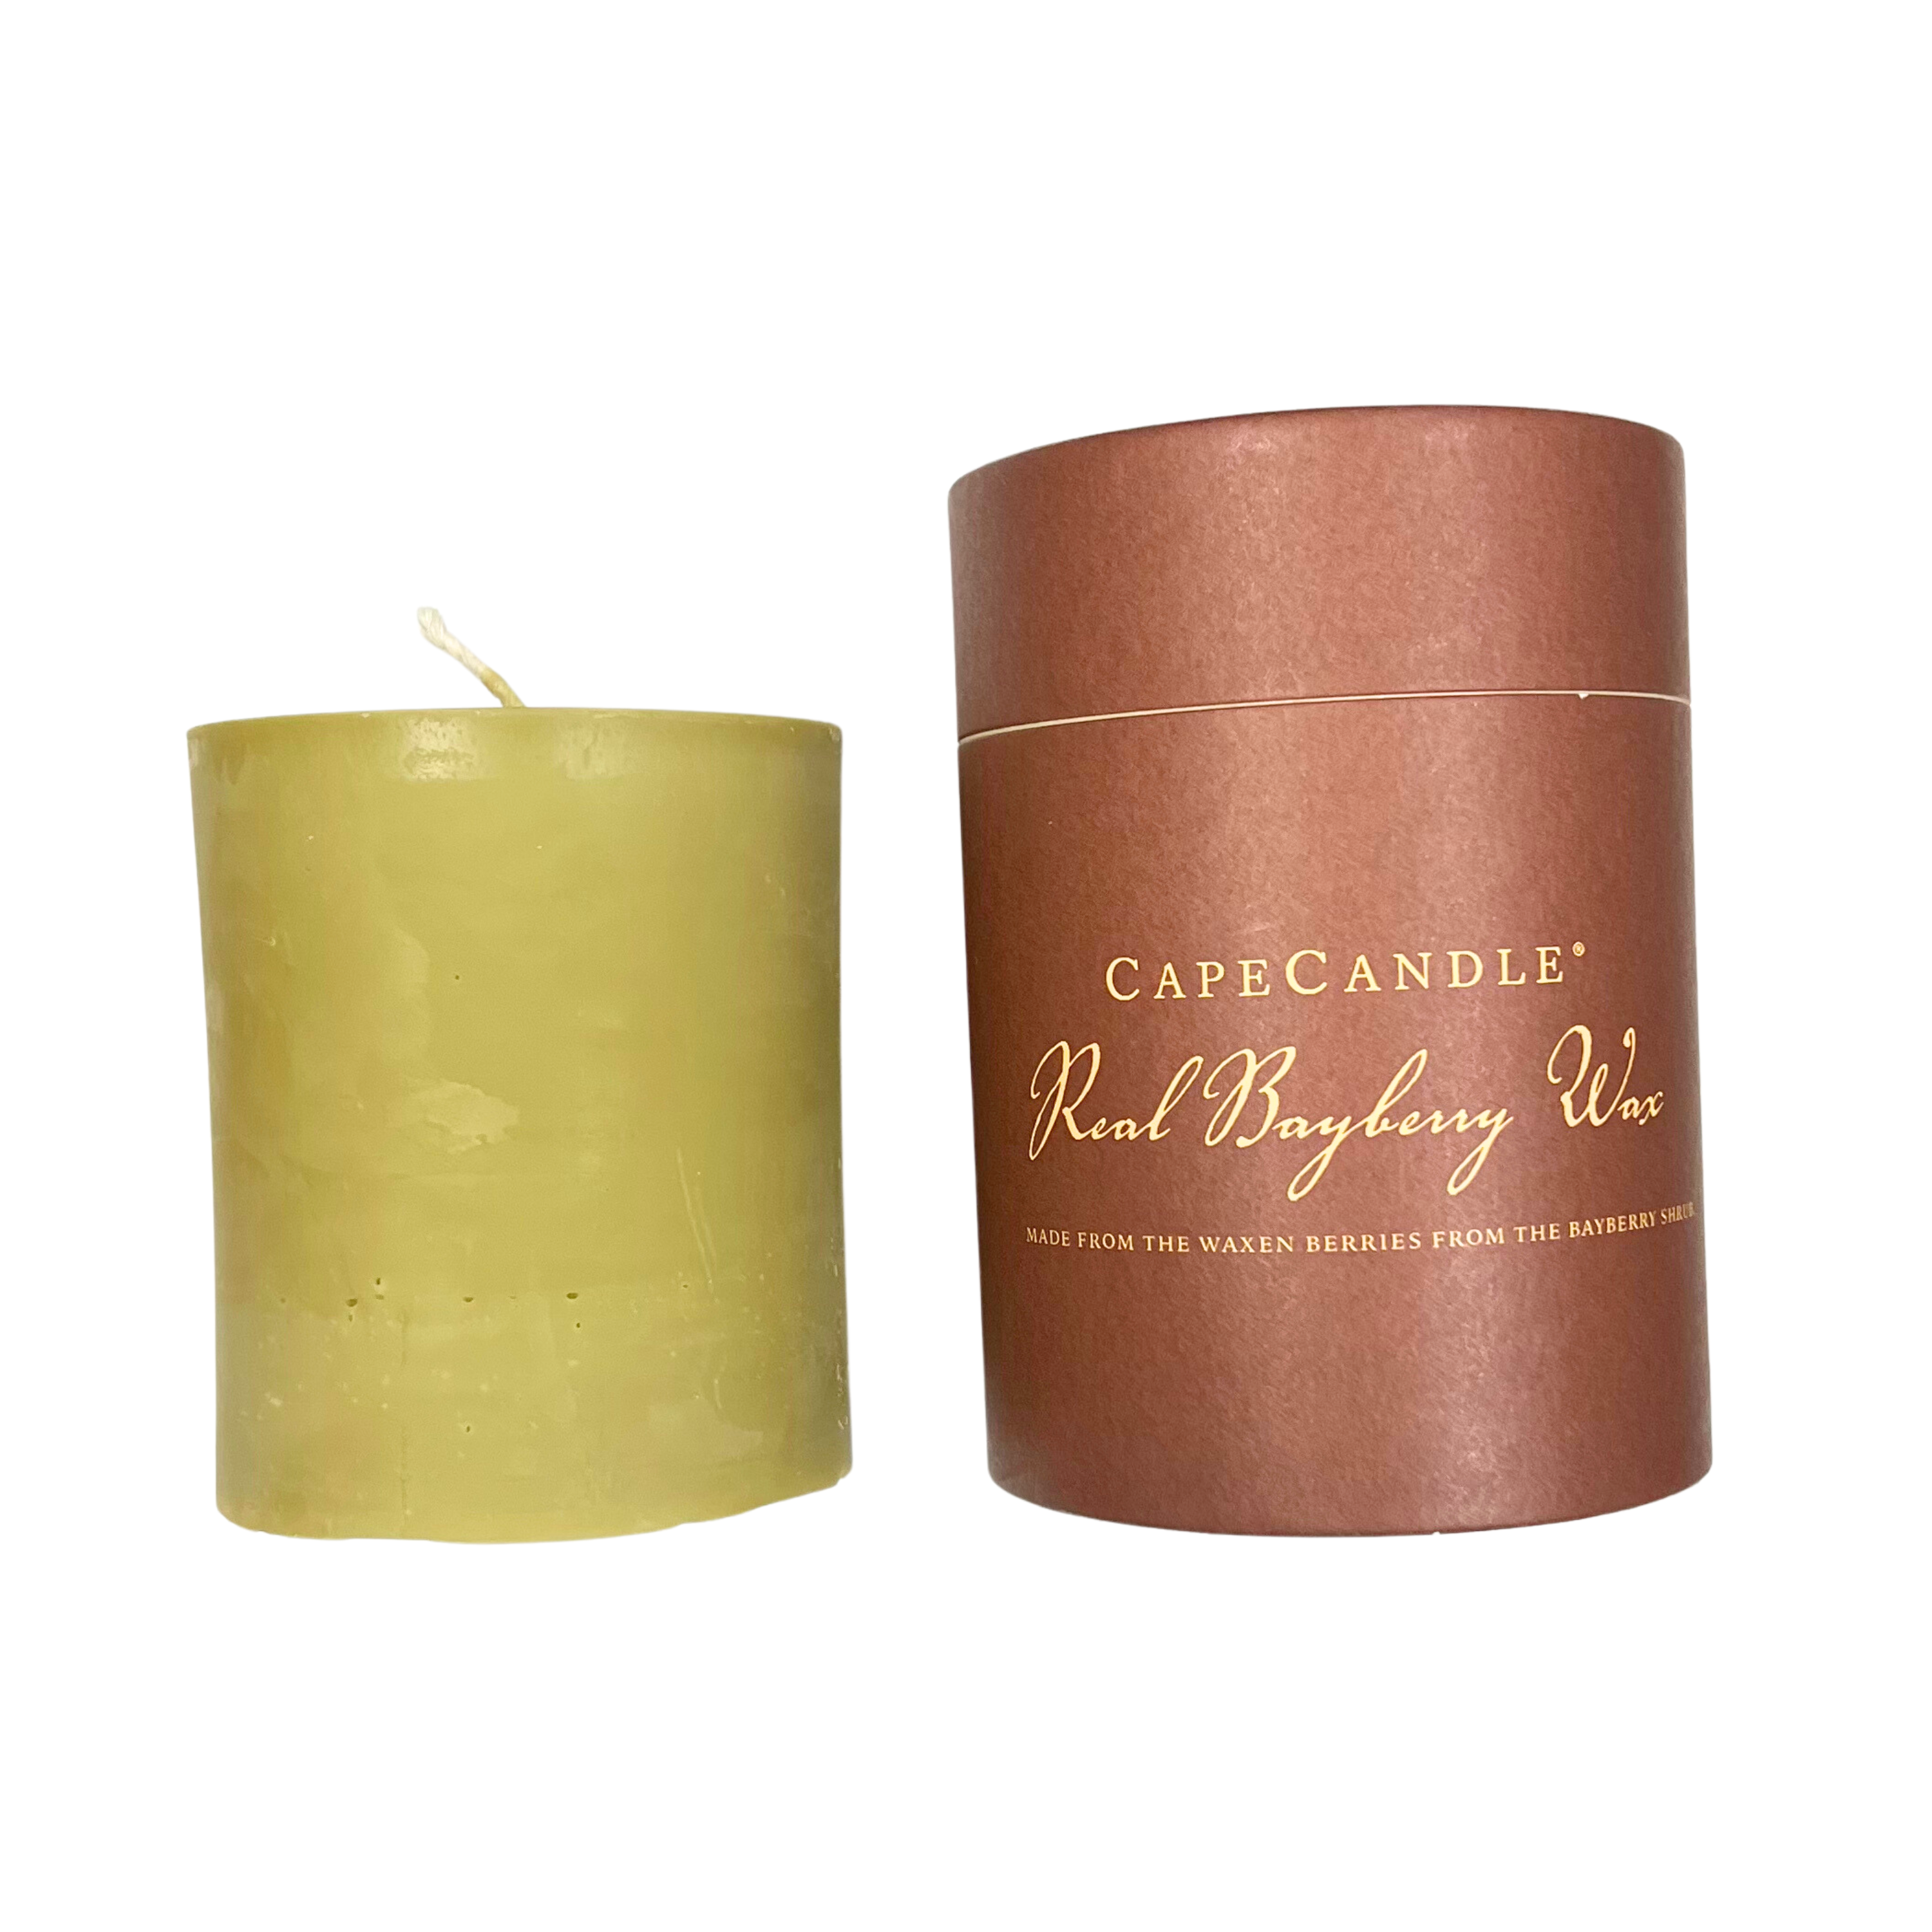 San Francisco Skyline Wood Wrapped Candle | Mahogany Scented Soy Based Square Candles with Wood Lid, 4x4x4